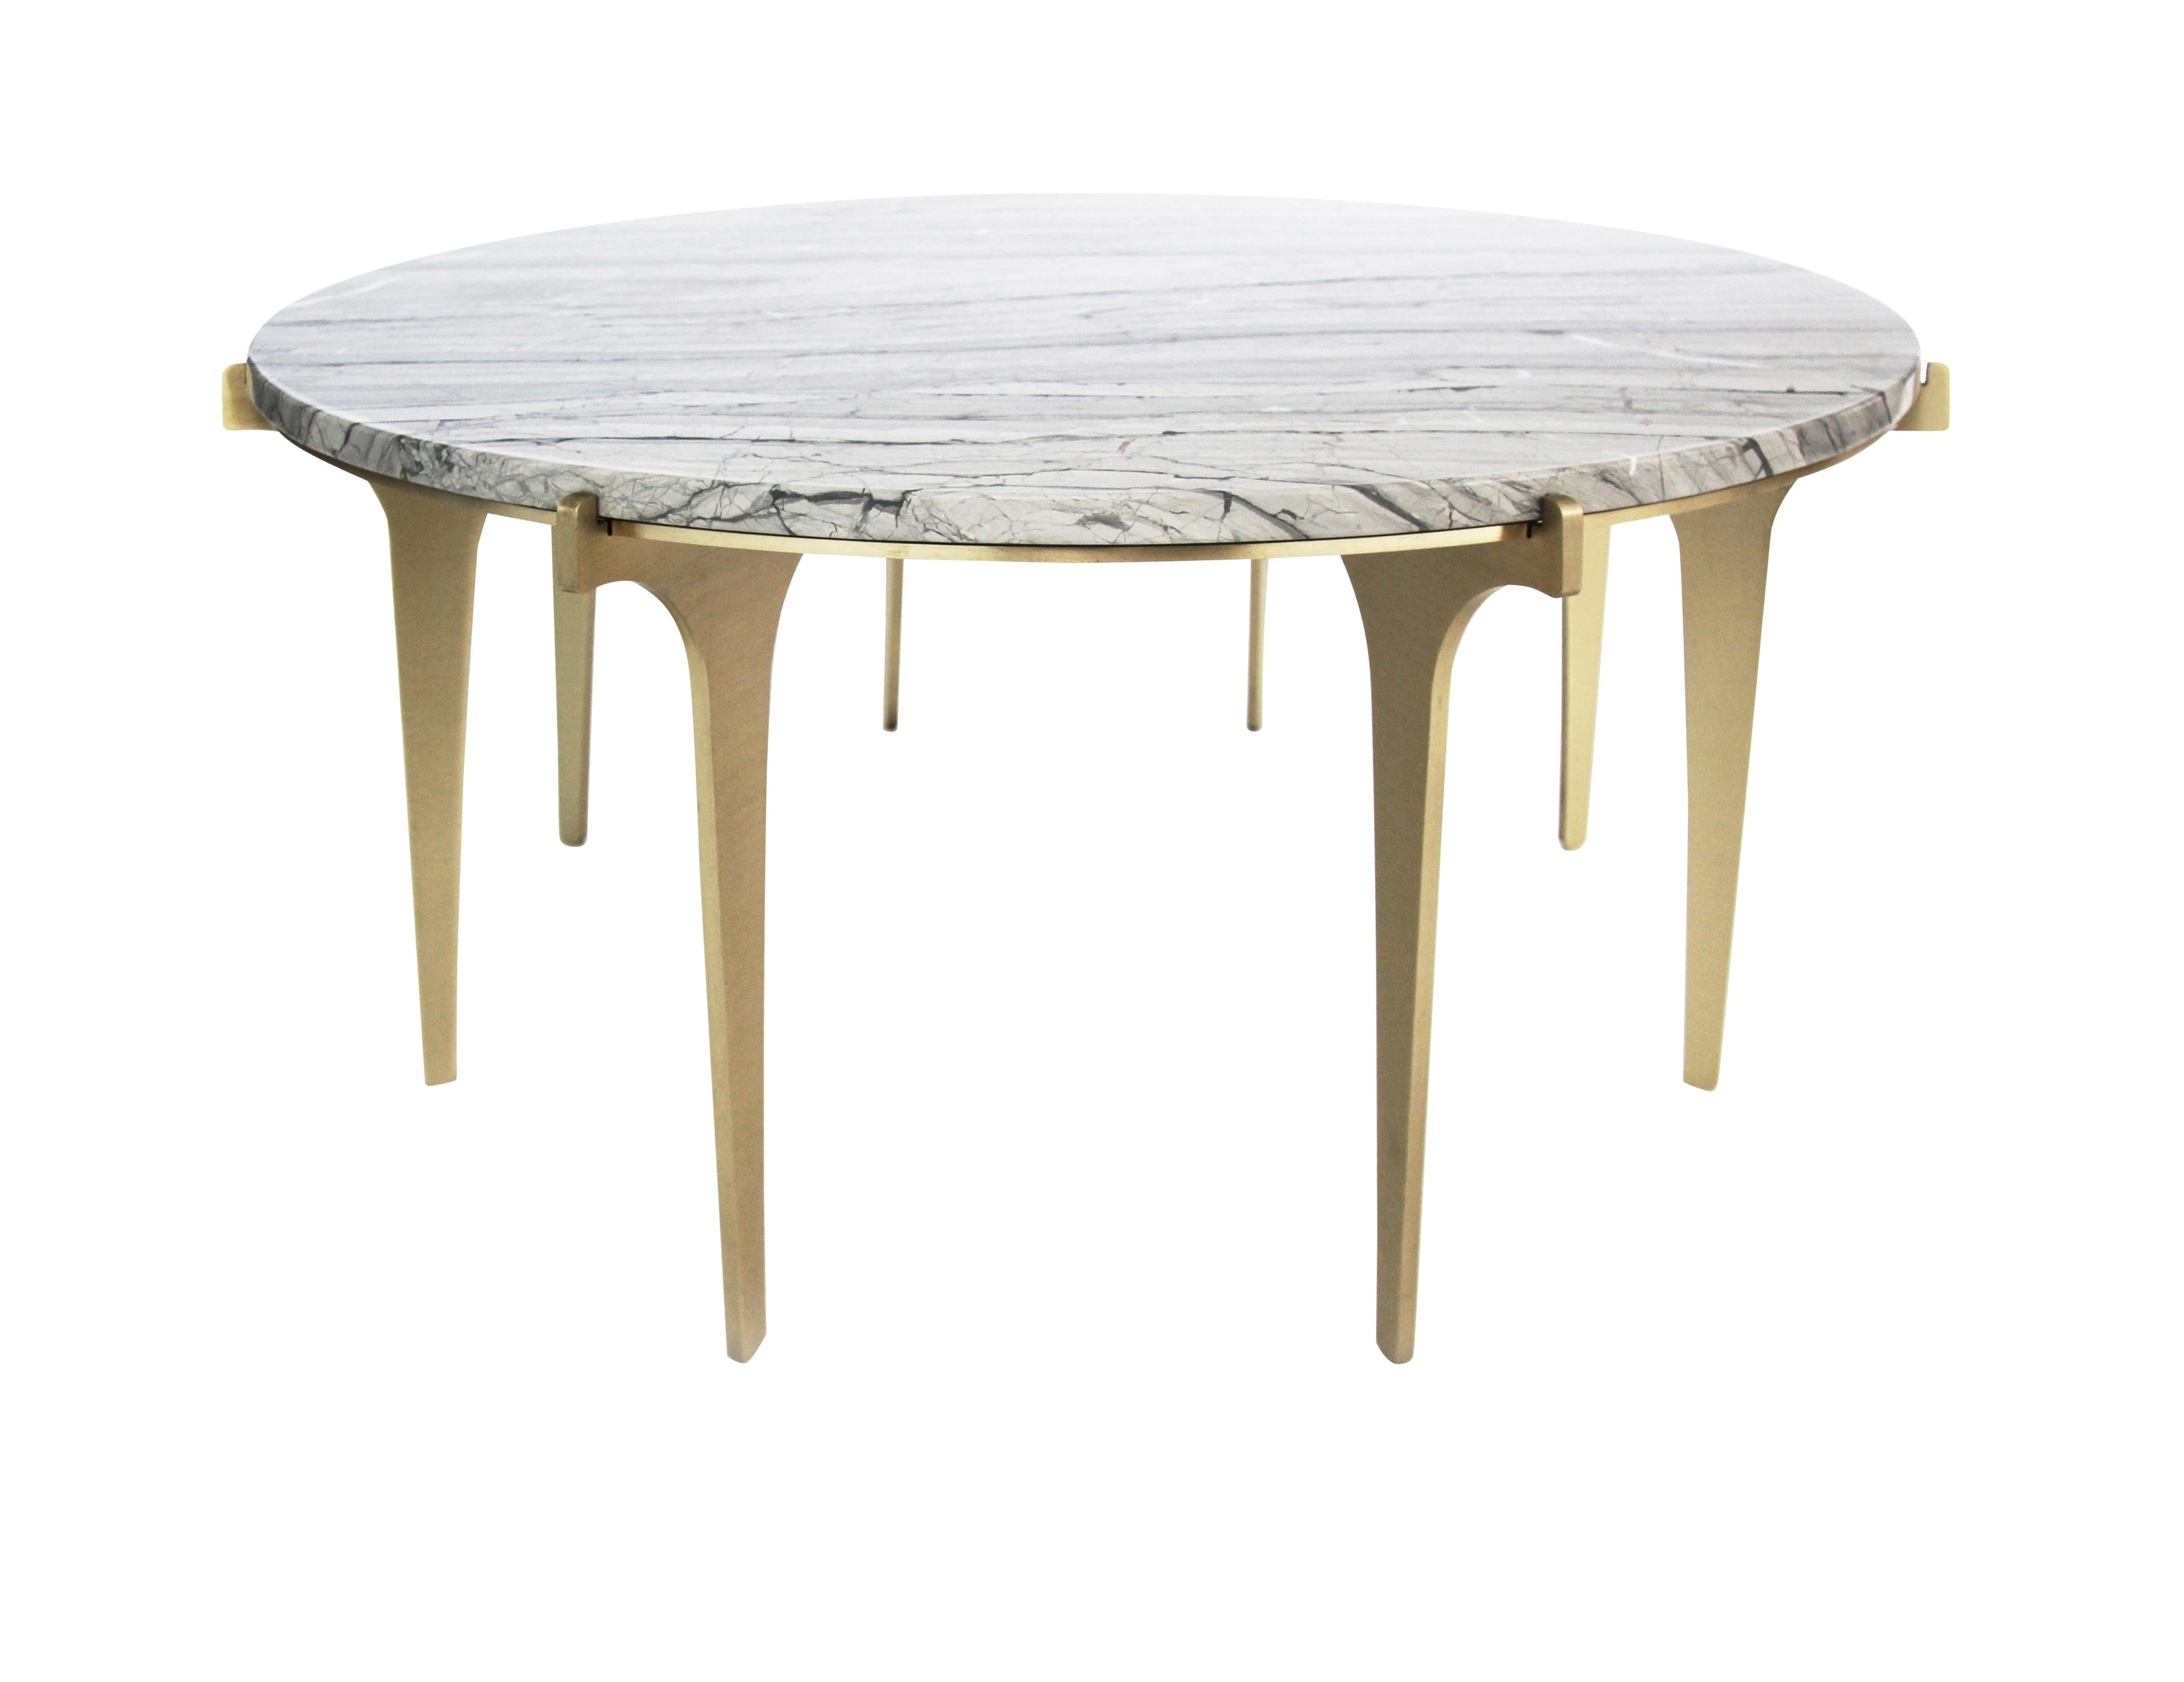 Silver (Onda D'Argento - Silver) Prong Round Coffee Table in Satin Brass Base with Marble Top by Gabriel Scott